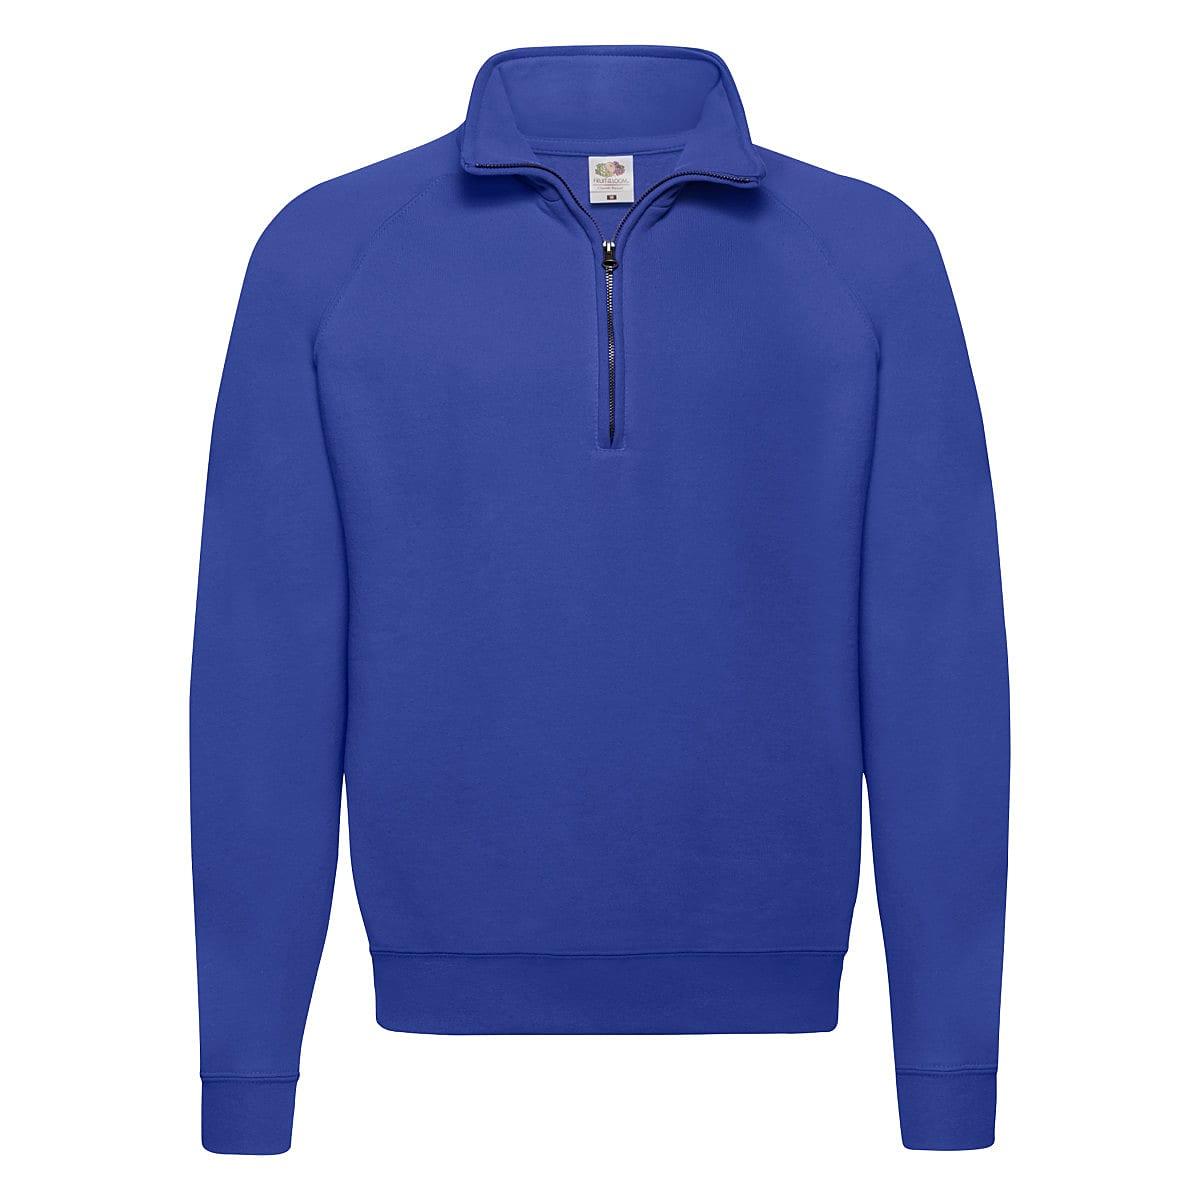 Fruit Of The Loom Mens Classic Zip Neck Sweater in Royal Blue (Product Code: 62114)